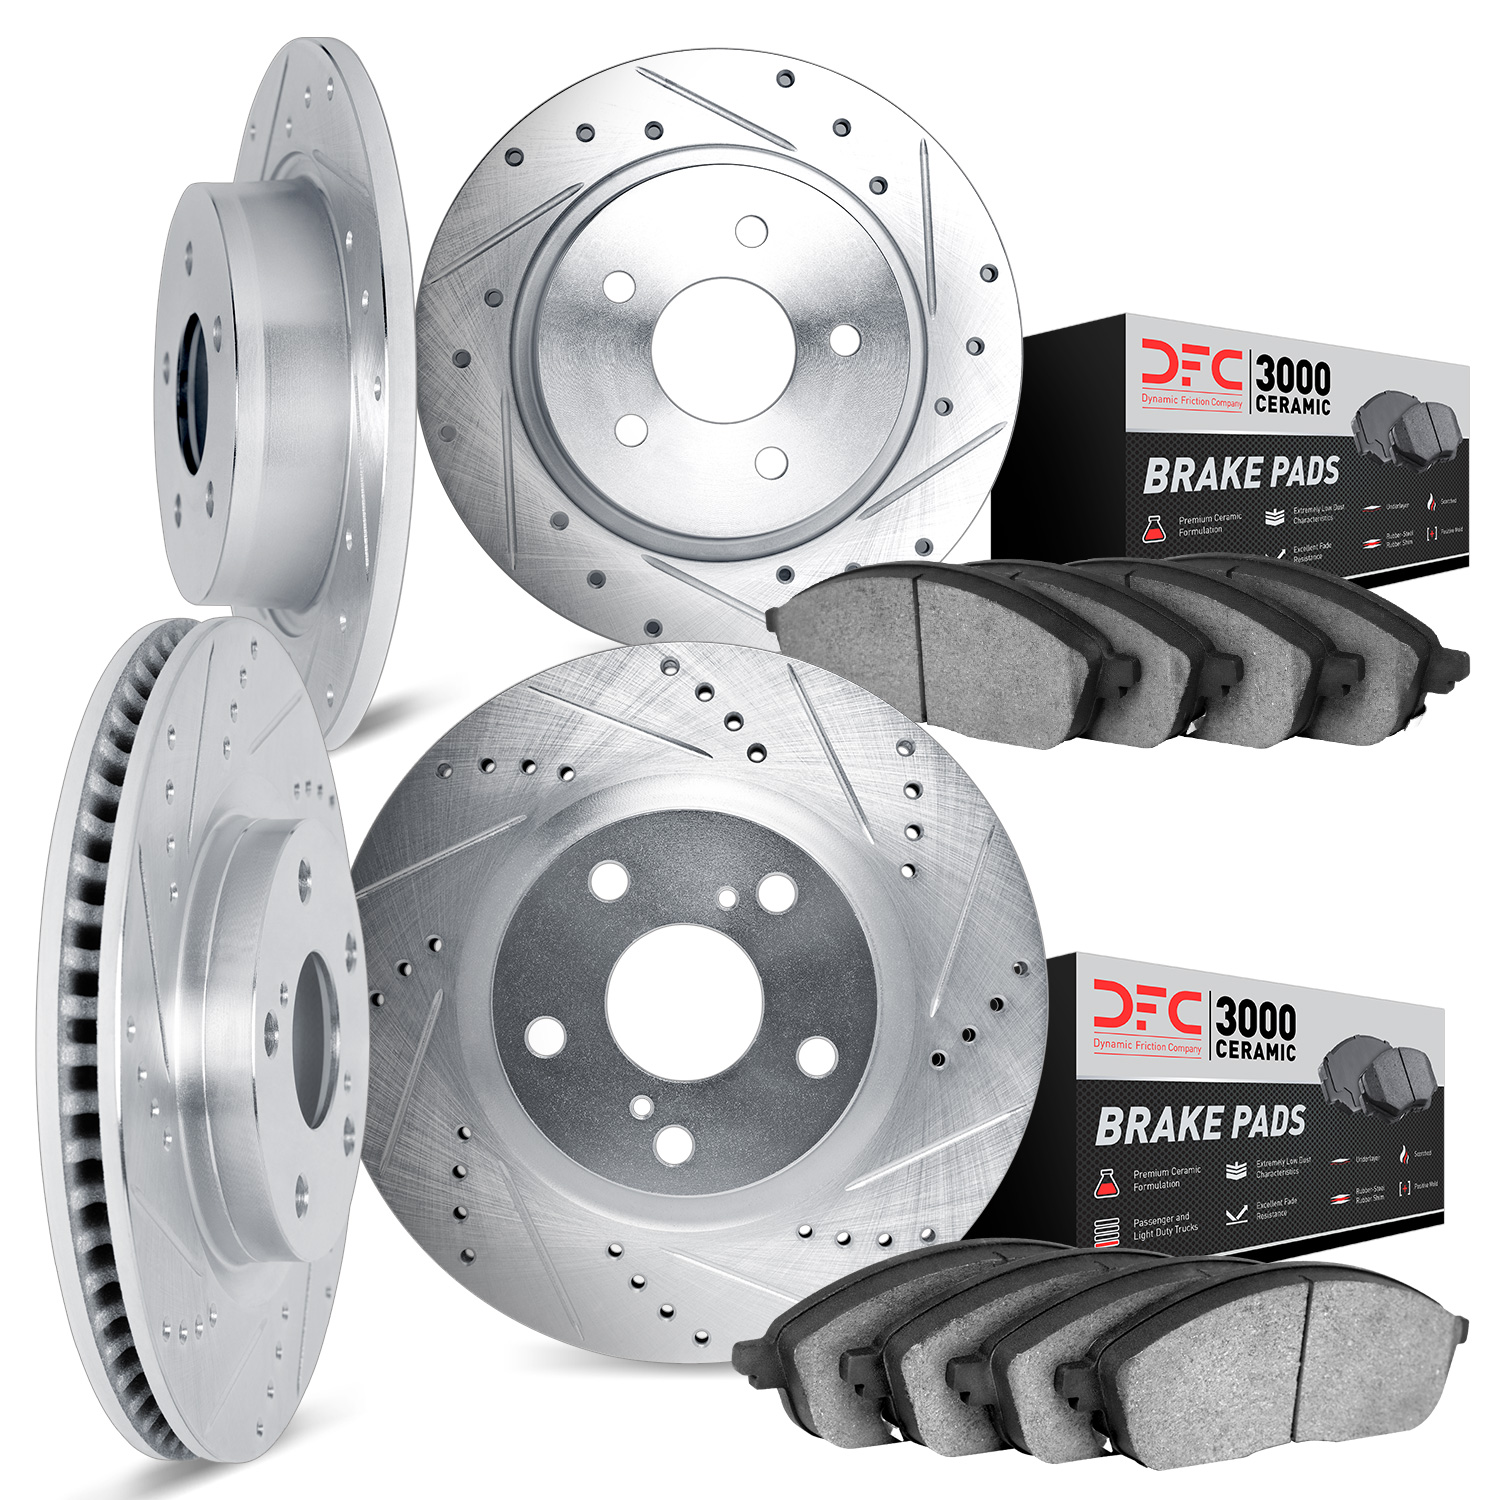 7304-54119 Drilled/Slotted Brake Rotor with 3000-Series Ceramic Brake Pads Kit [Silver], 2015-2020 Ford/Lincoln/Mercury/Mazda, P